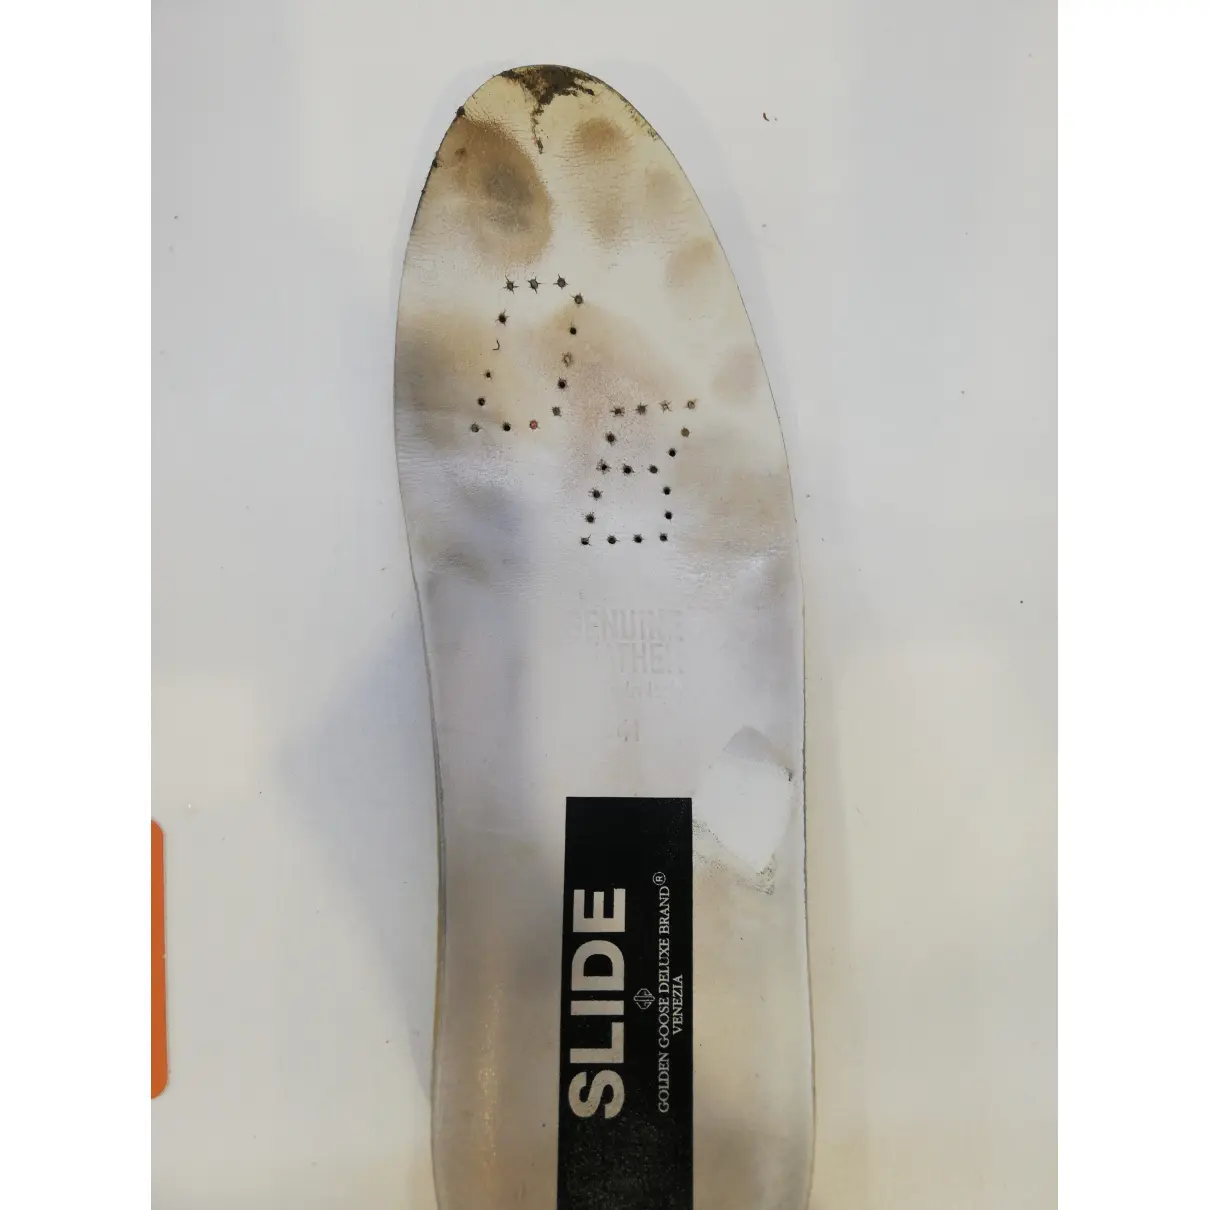 Slide leather high trainers Golden Goose